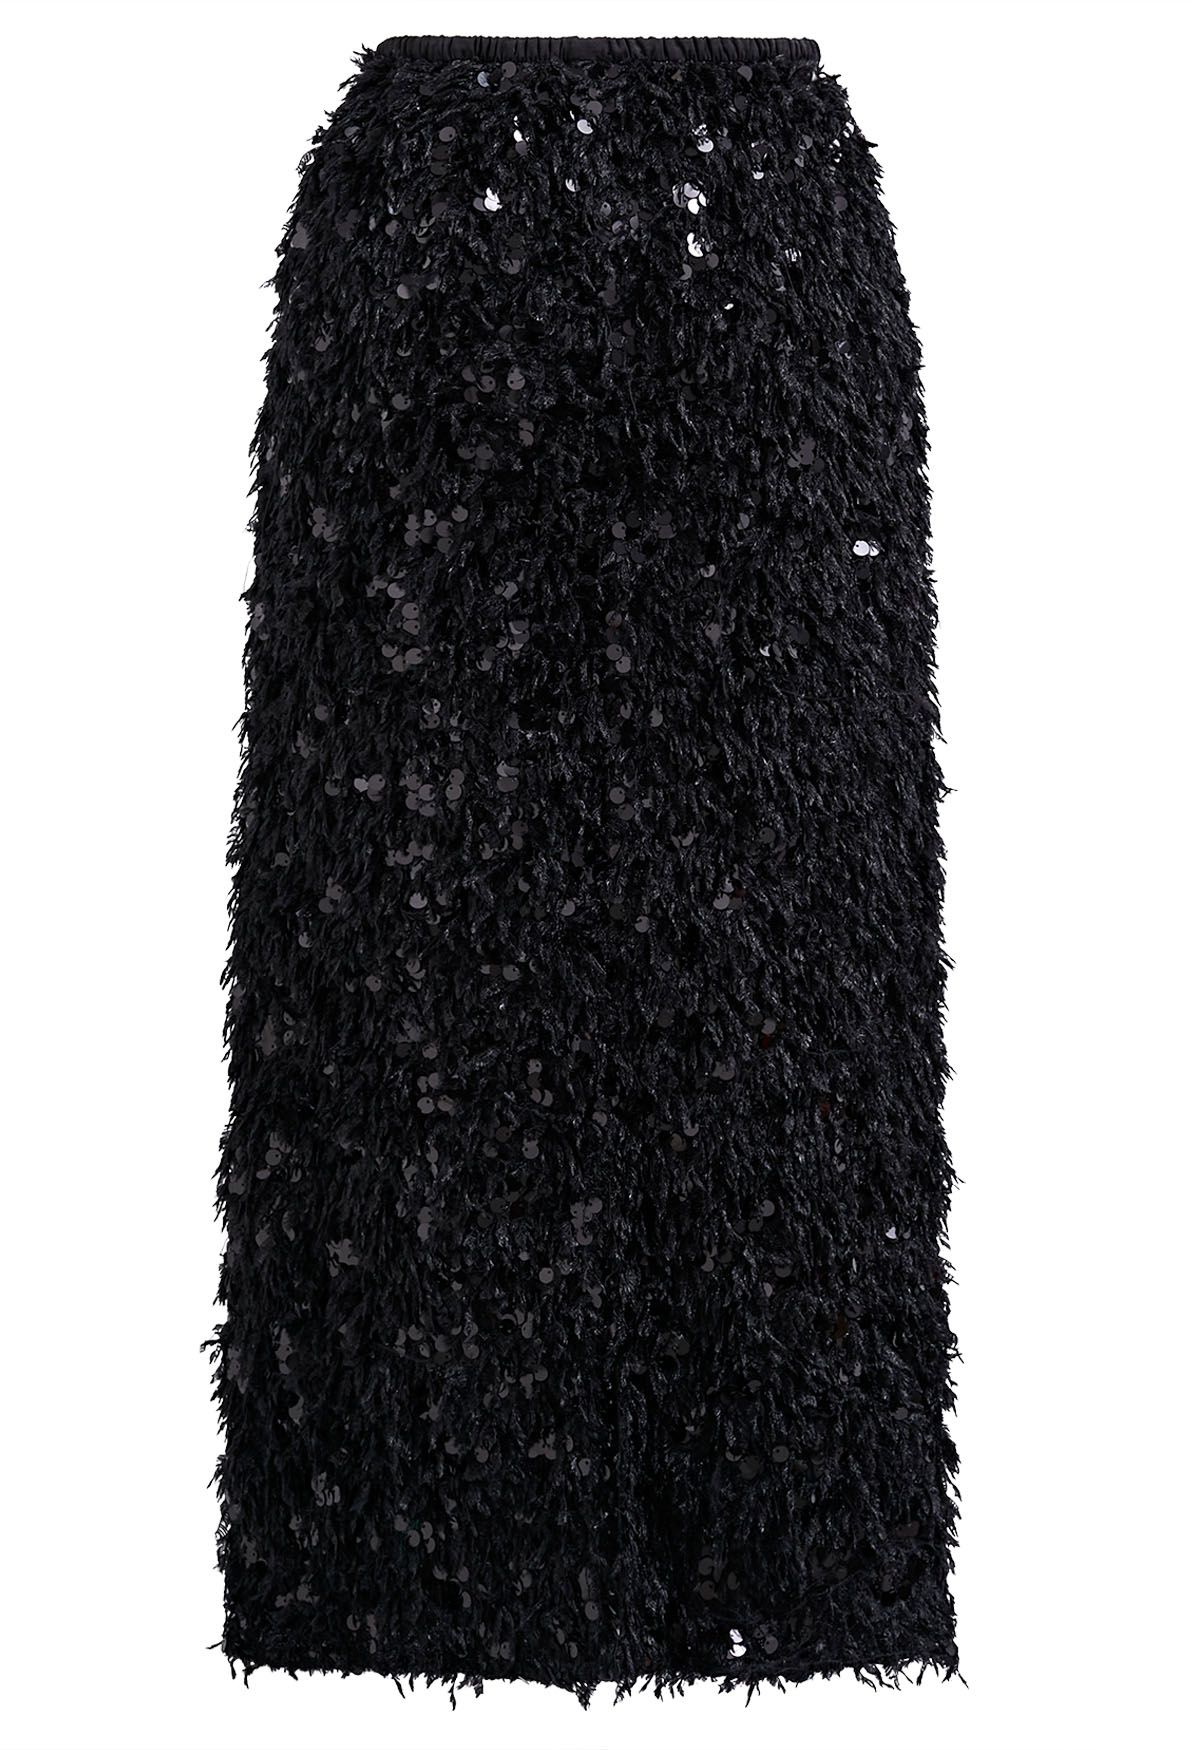 Full Feather Sequined Pencil Skirt in Black - Retro, Indie and Unique ...